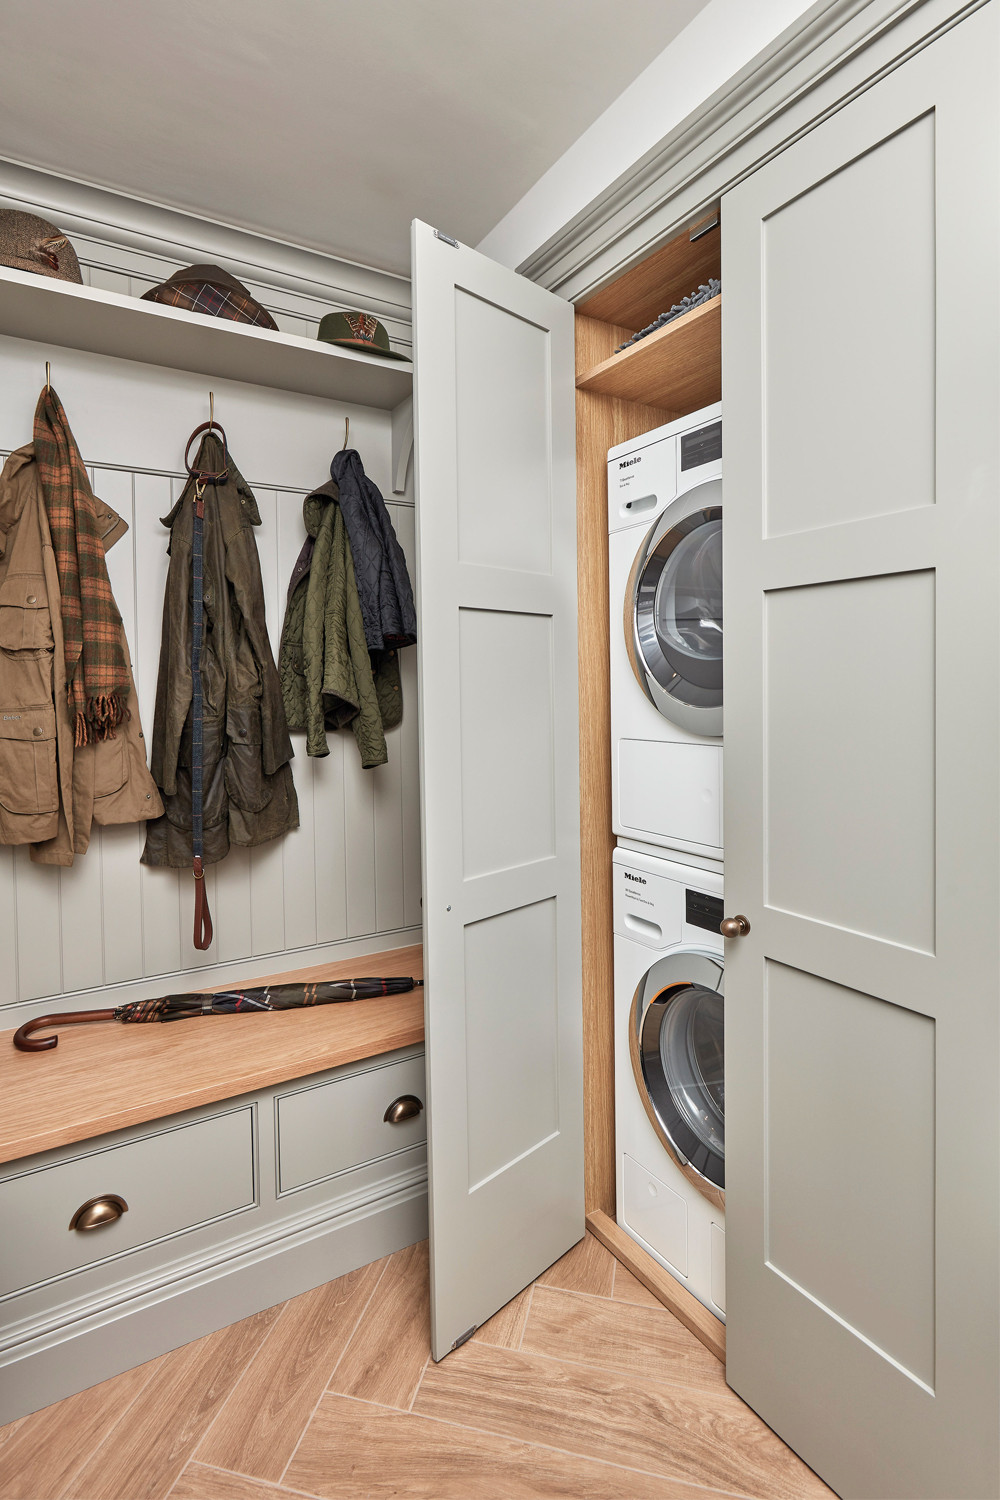 75 Beautiful Small Utility Room Ideas and Designs - February 2023 | Houzz UK